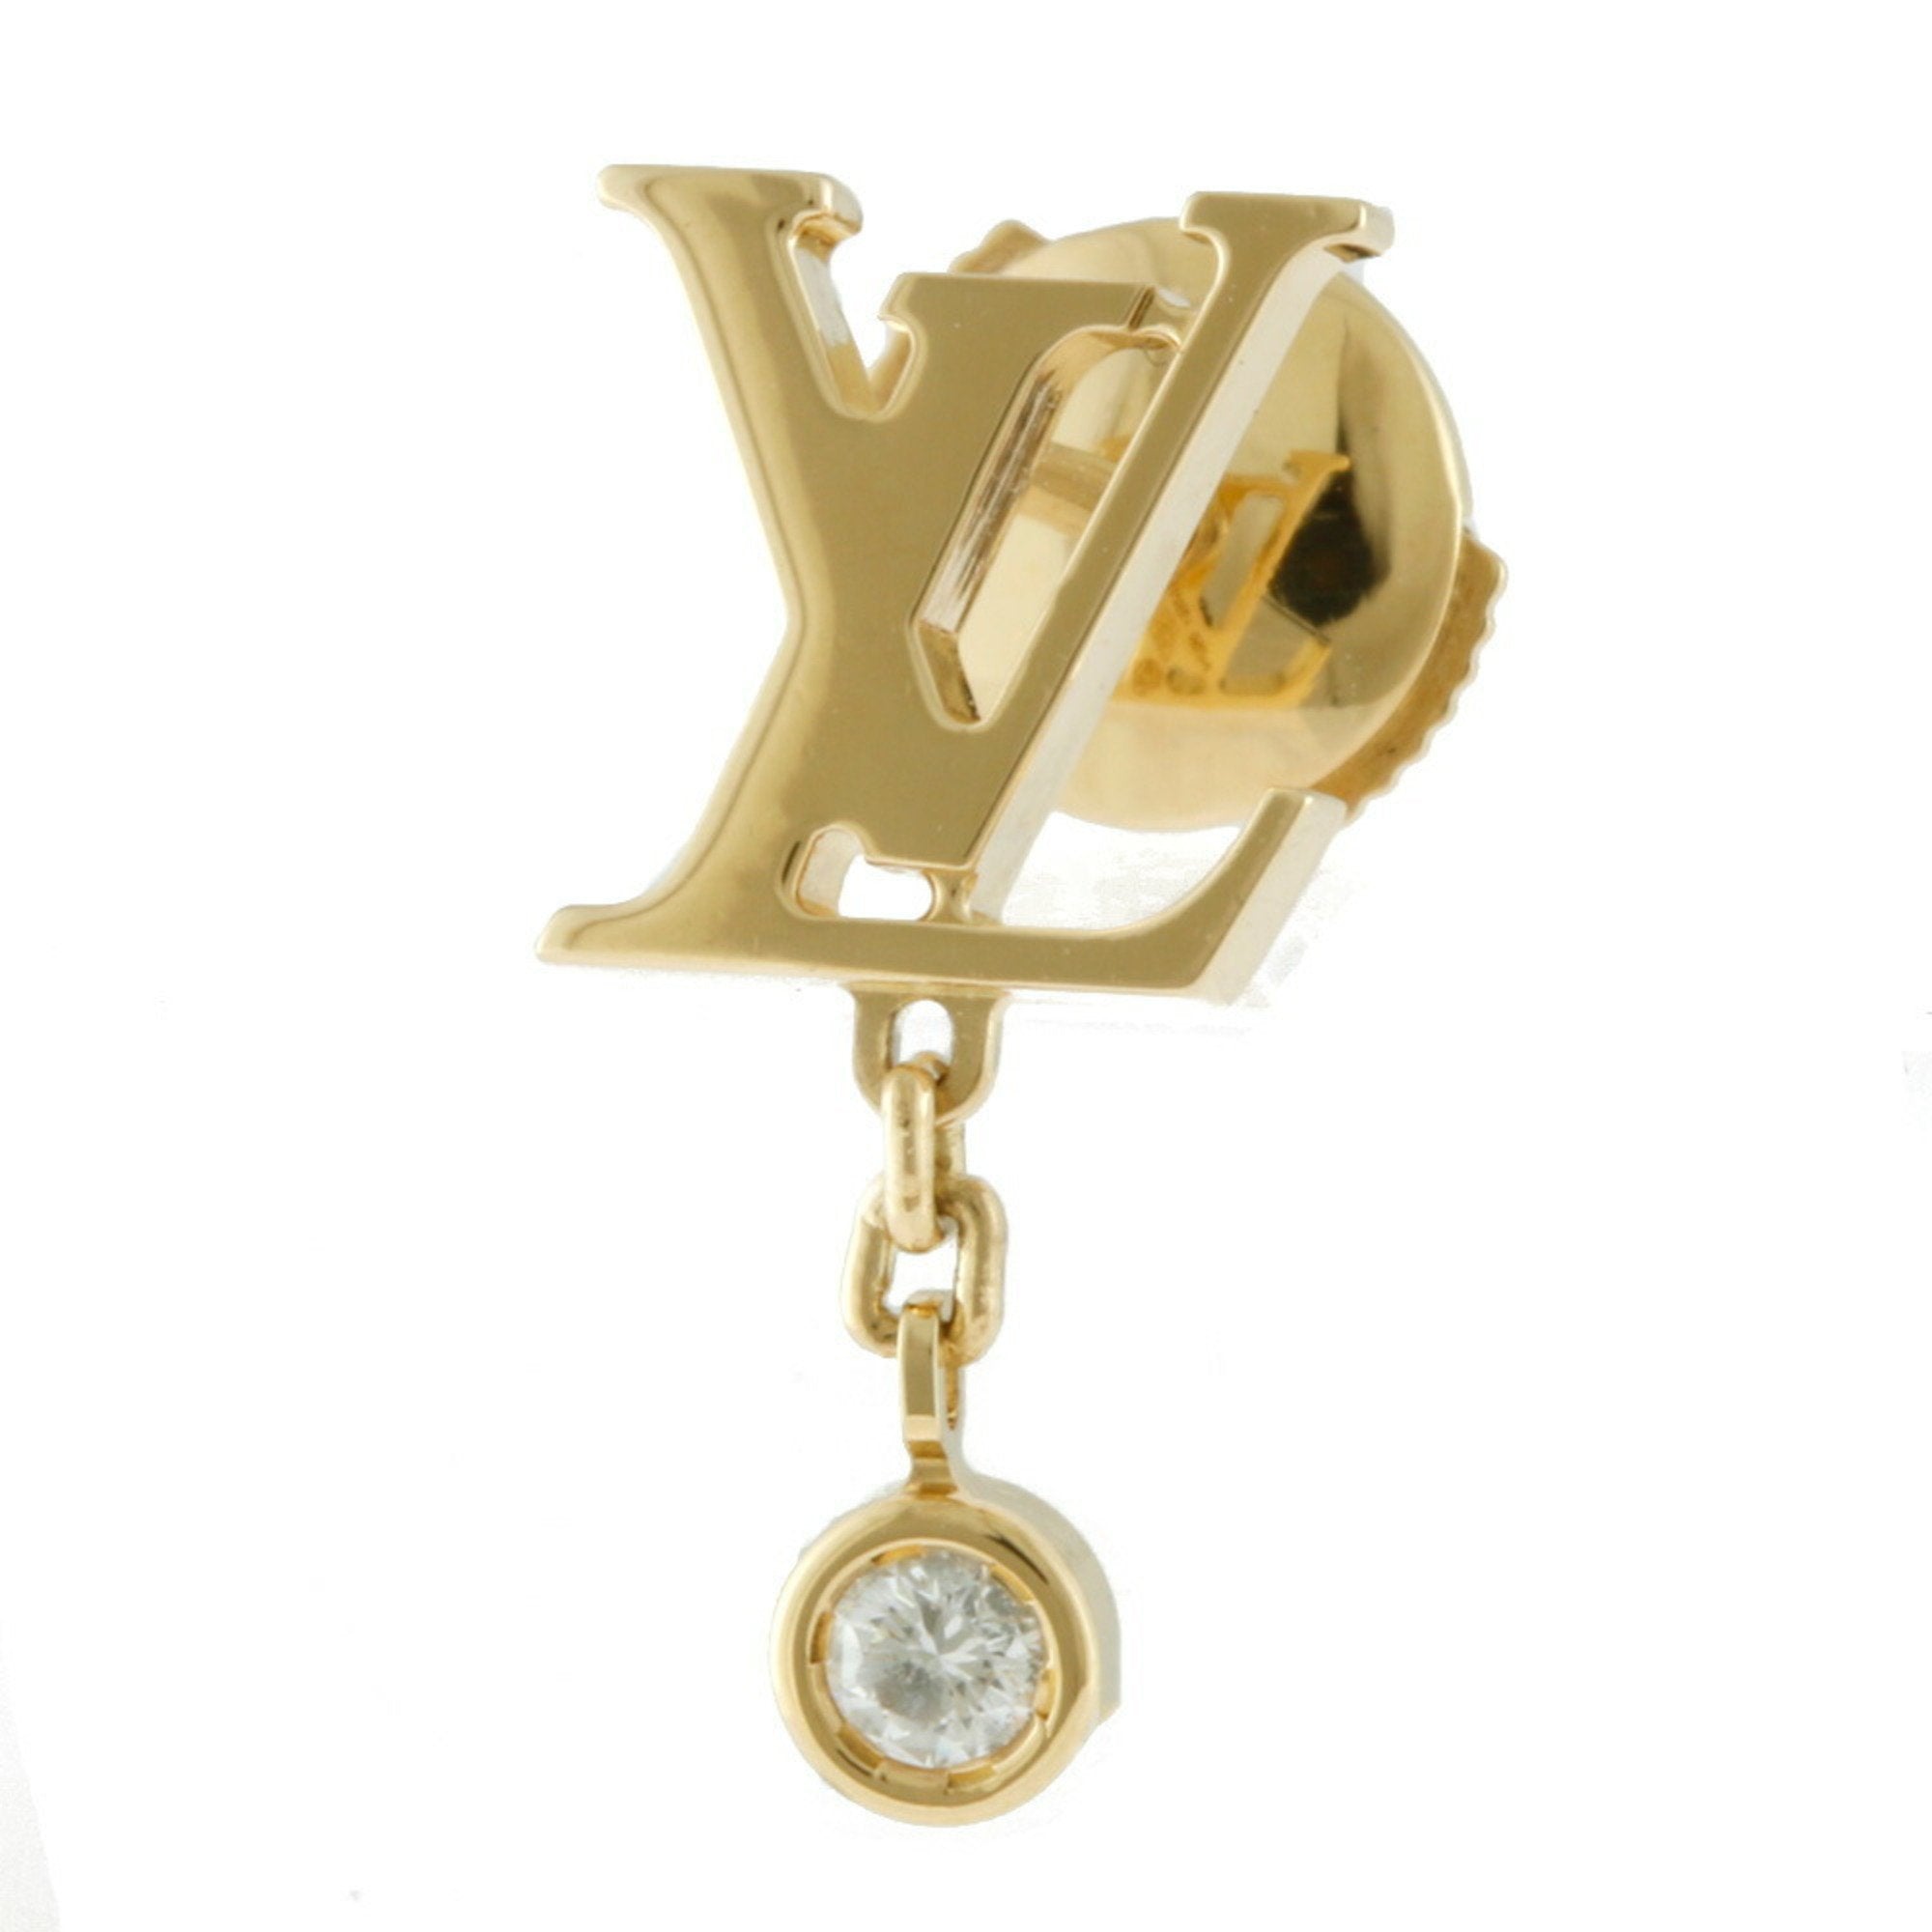 Louis Vuitton - Idylle Blossom Ear Cuff Pink Gold and Diamonds - per Unit - Pink Gold - Unisex - Luxury